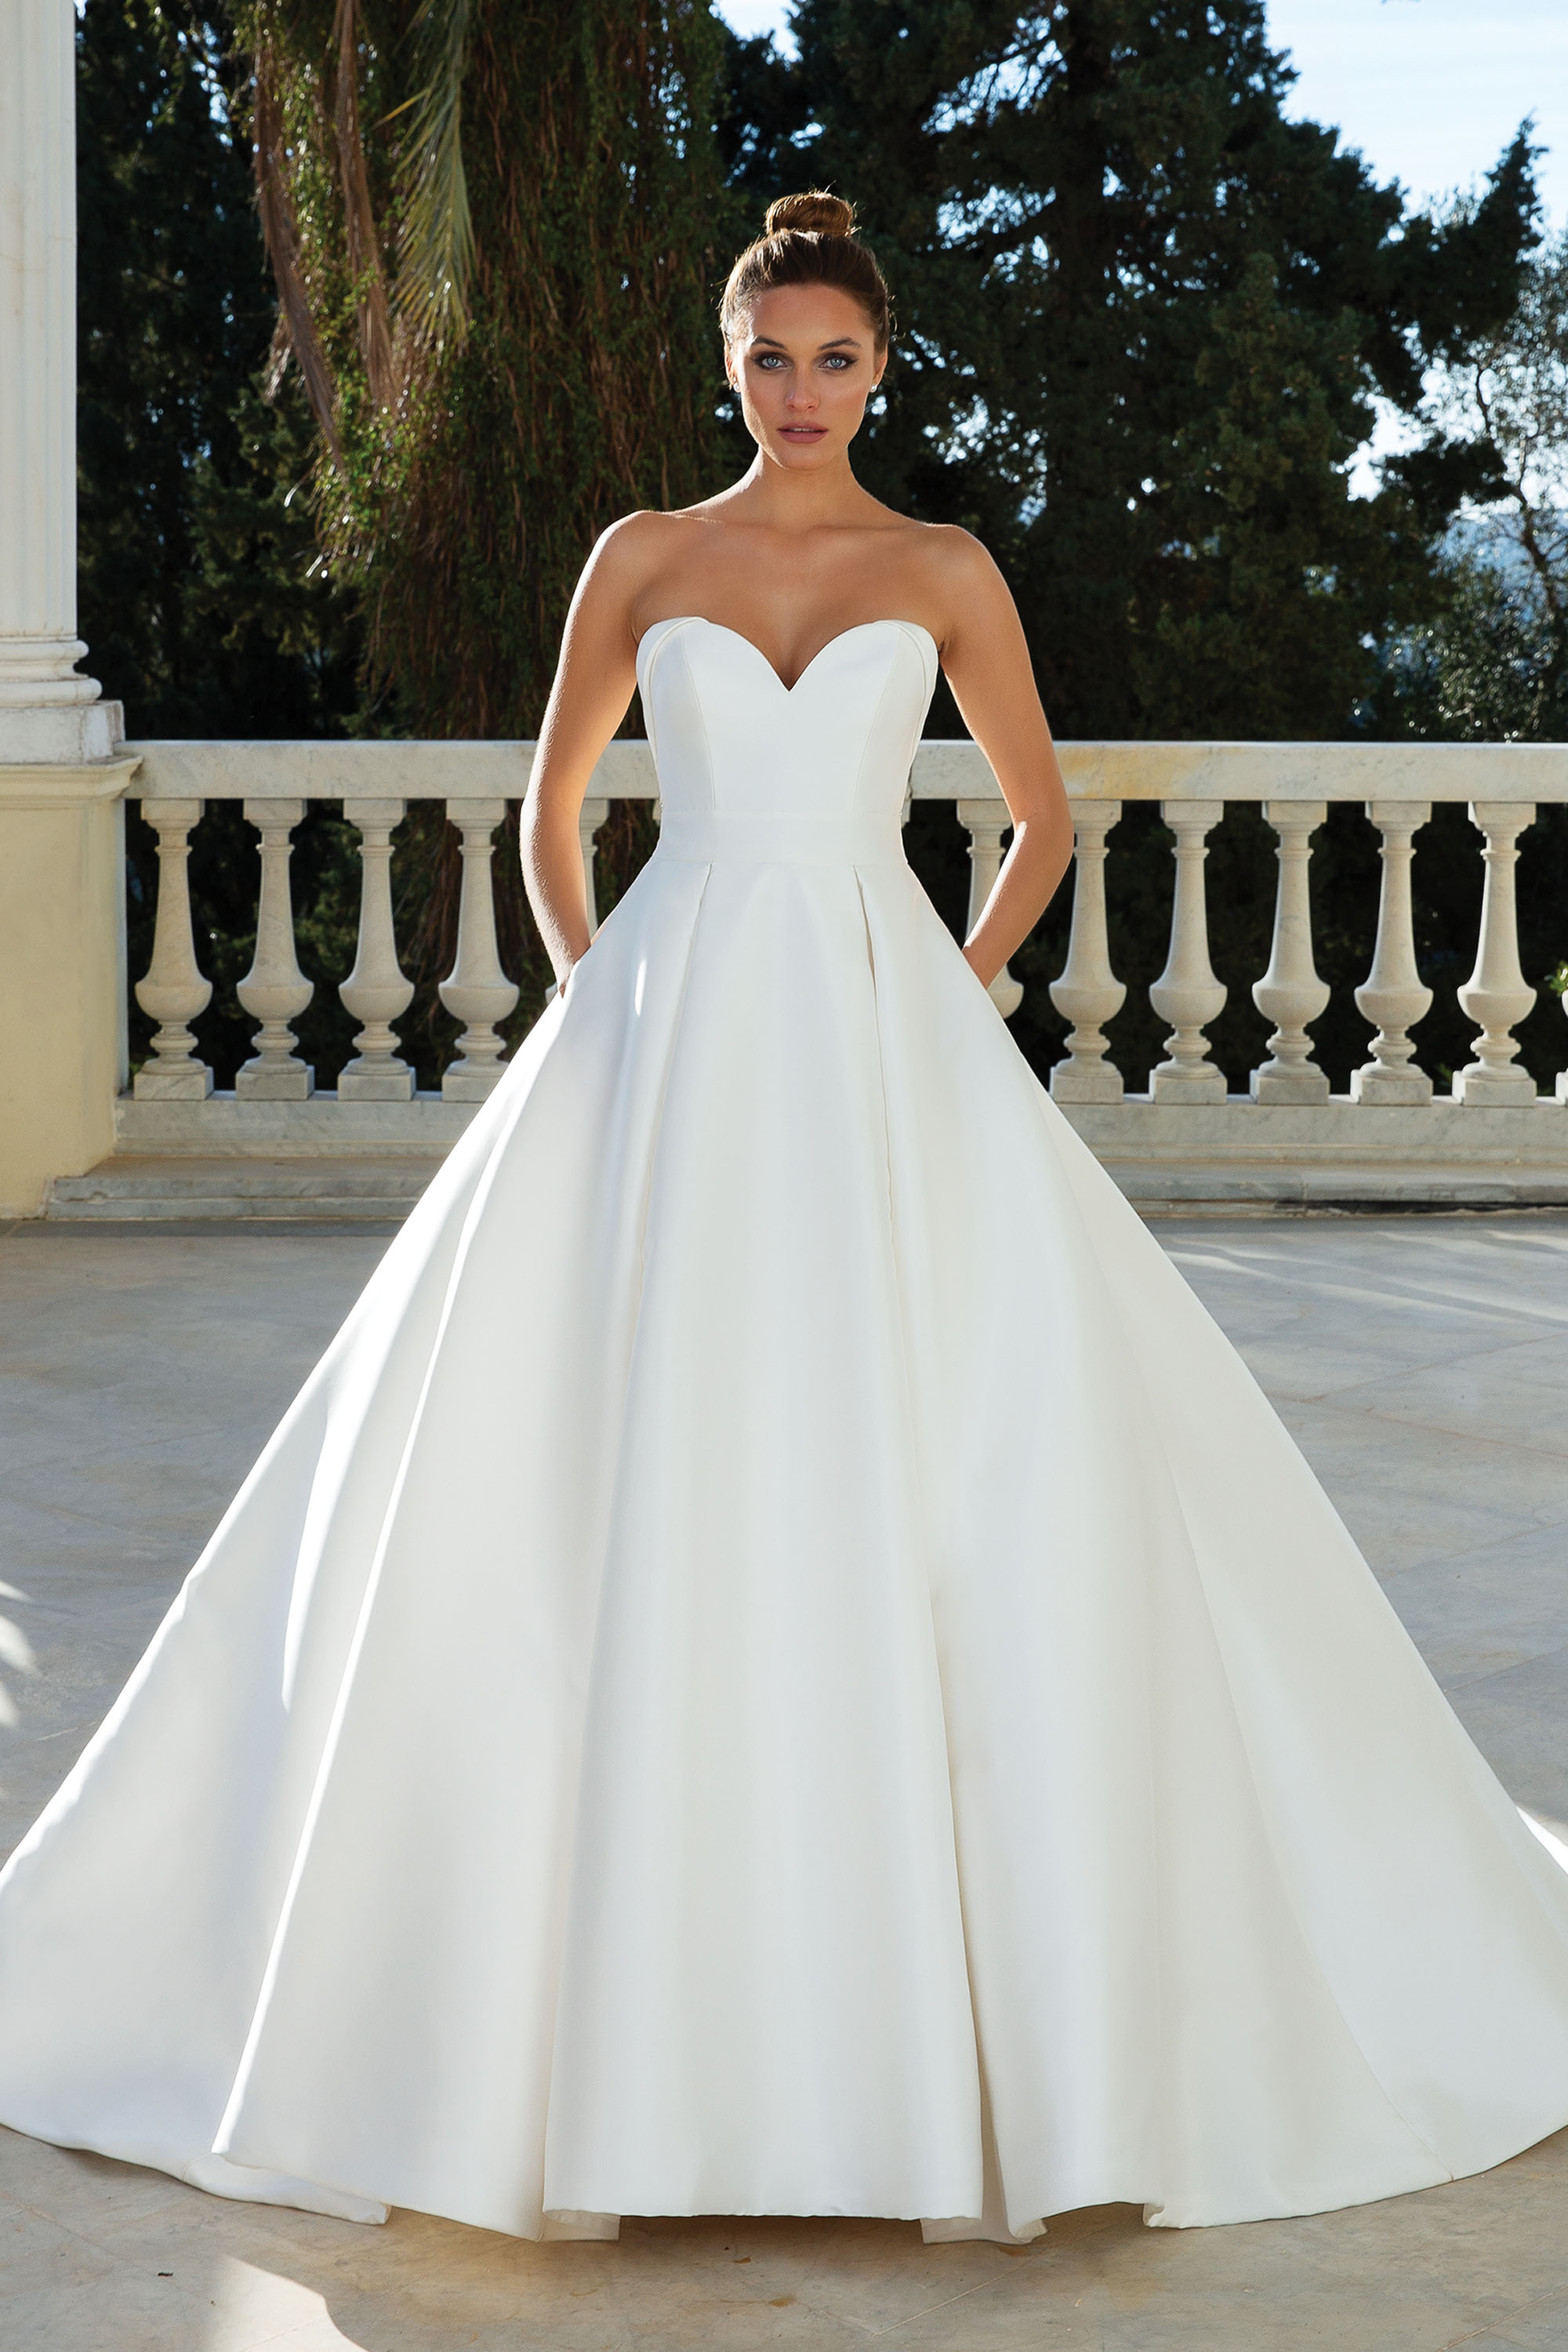 Sleeveless wedding dress with sweetheart neckline and princess or ball gown body